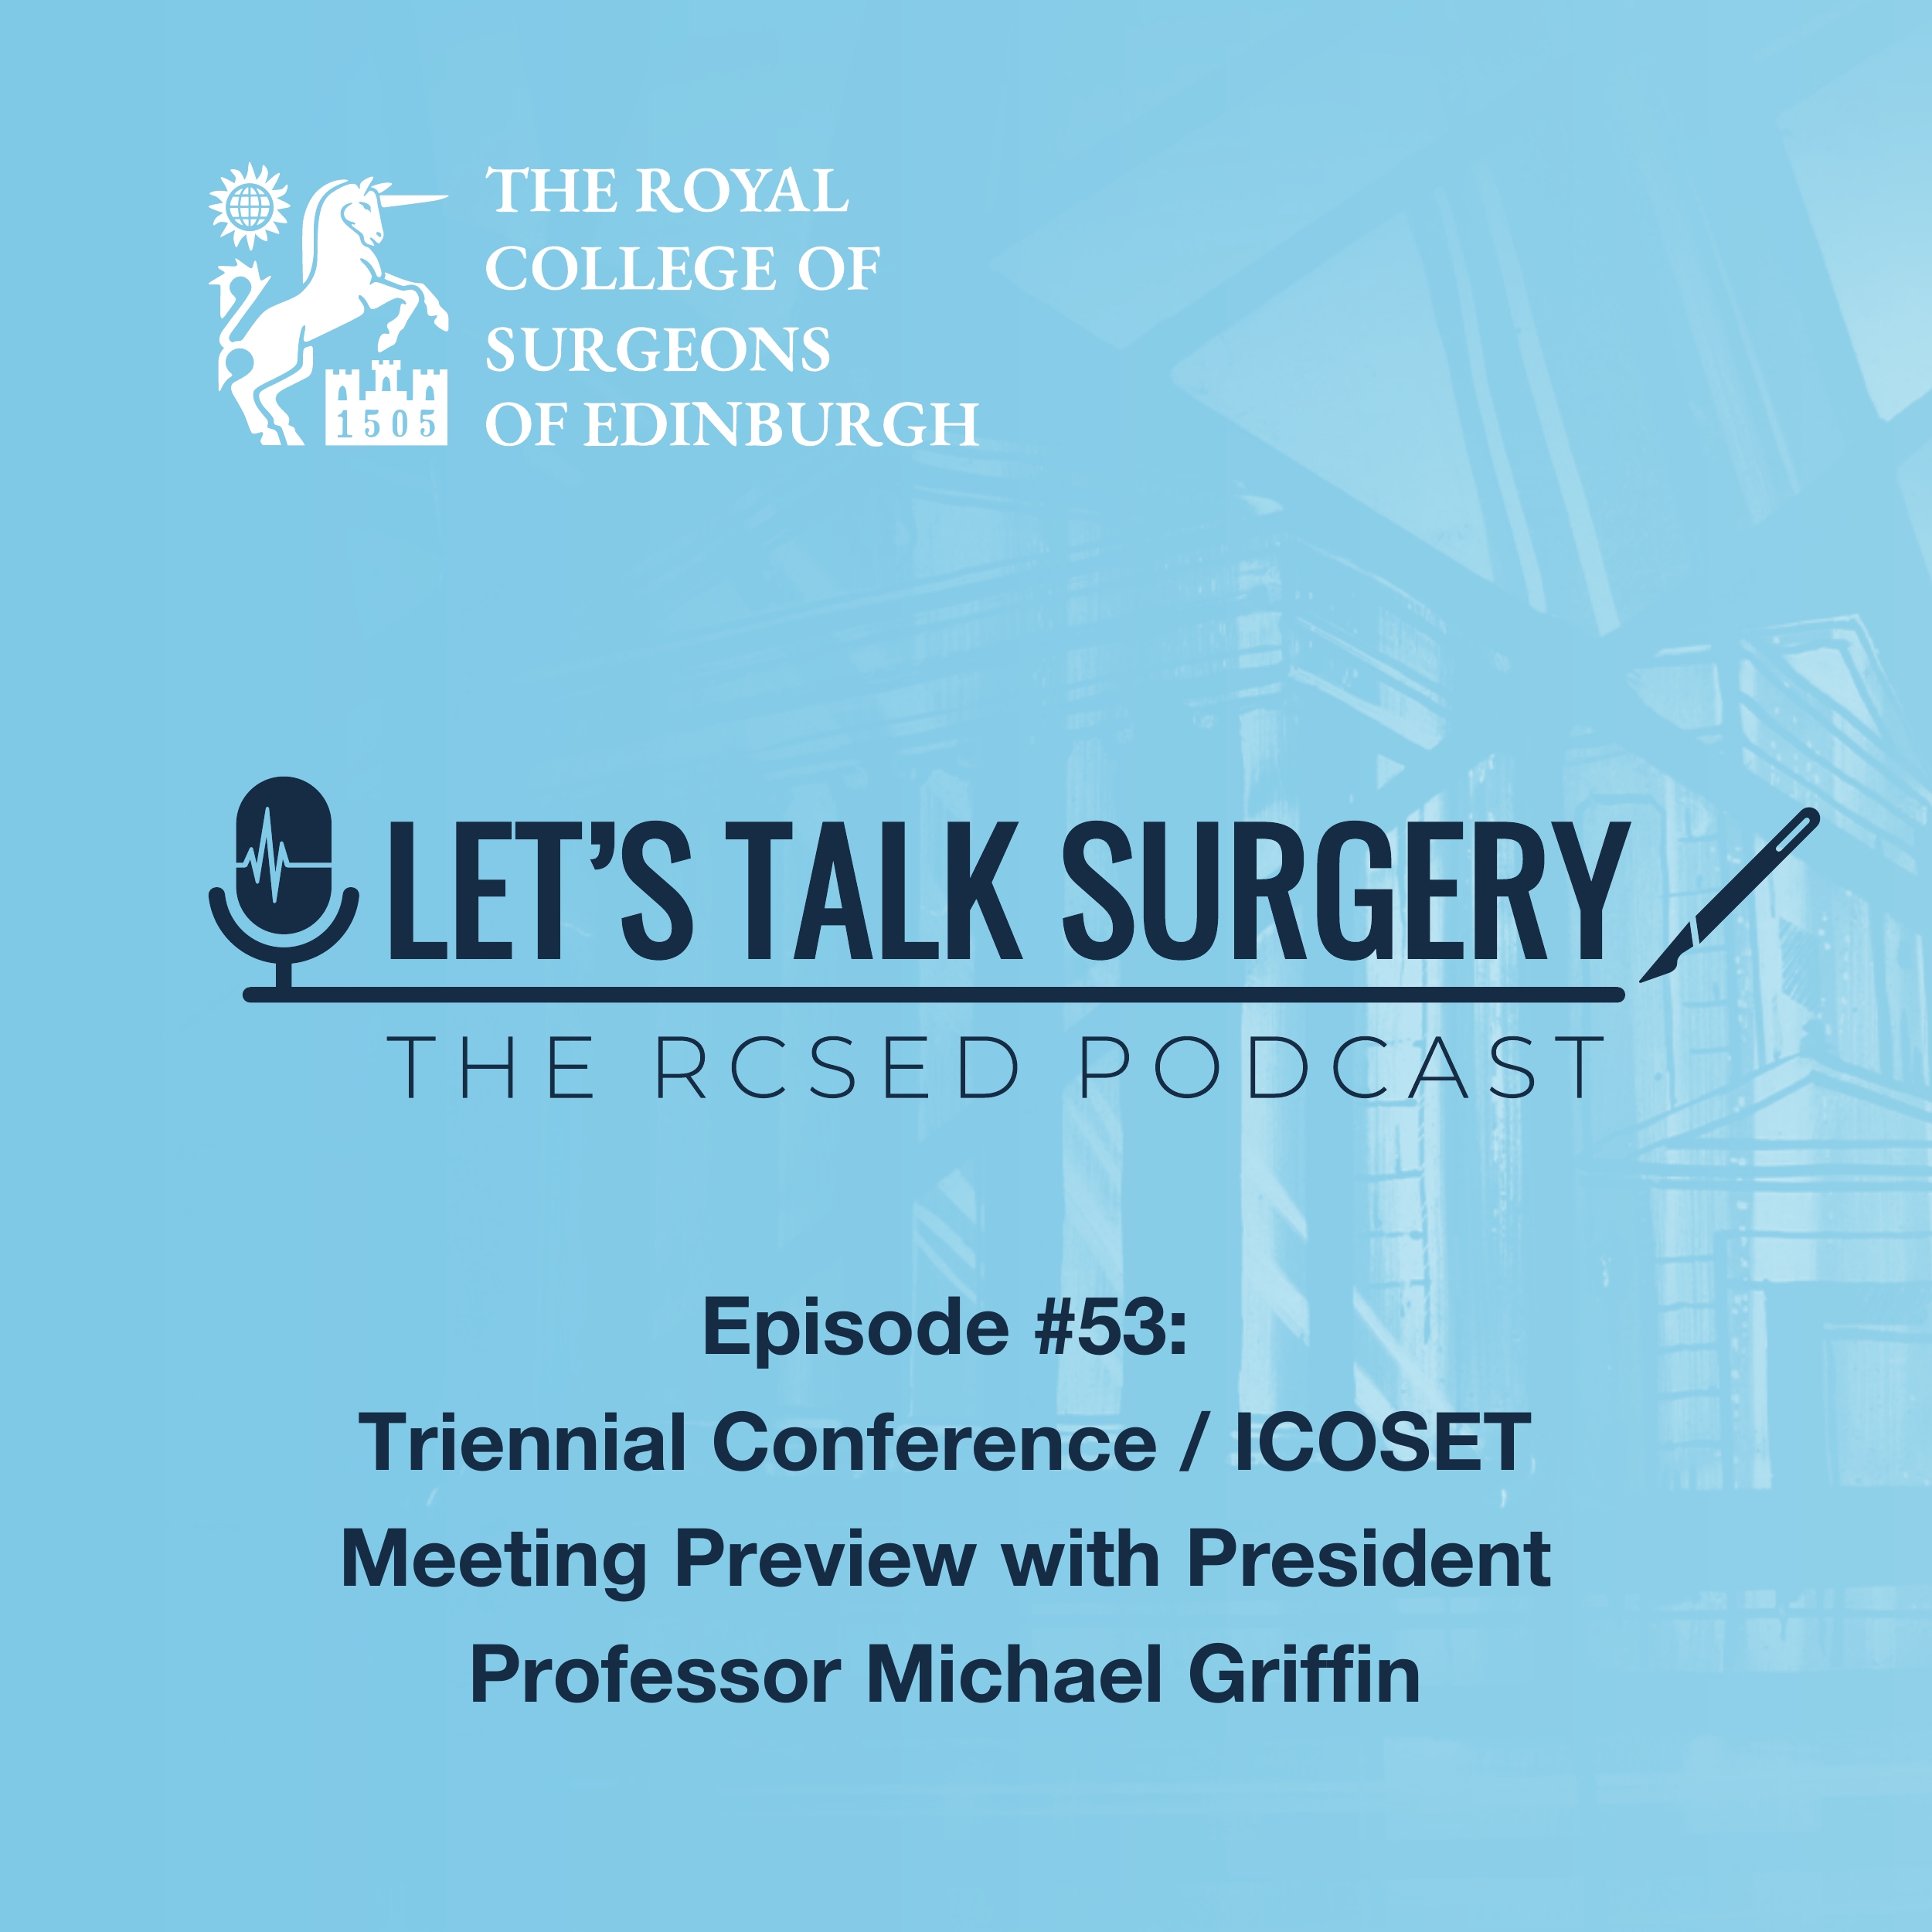 Episode 54: "Triennial Conference / ICOSET Meeting Preview with President Professor Michael Griffin"